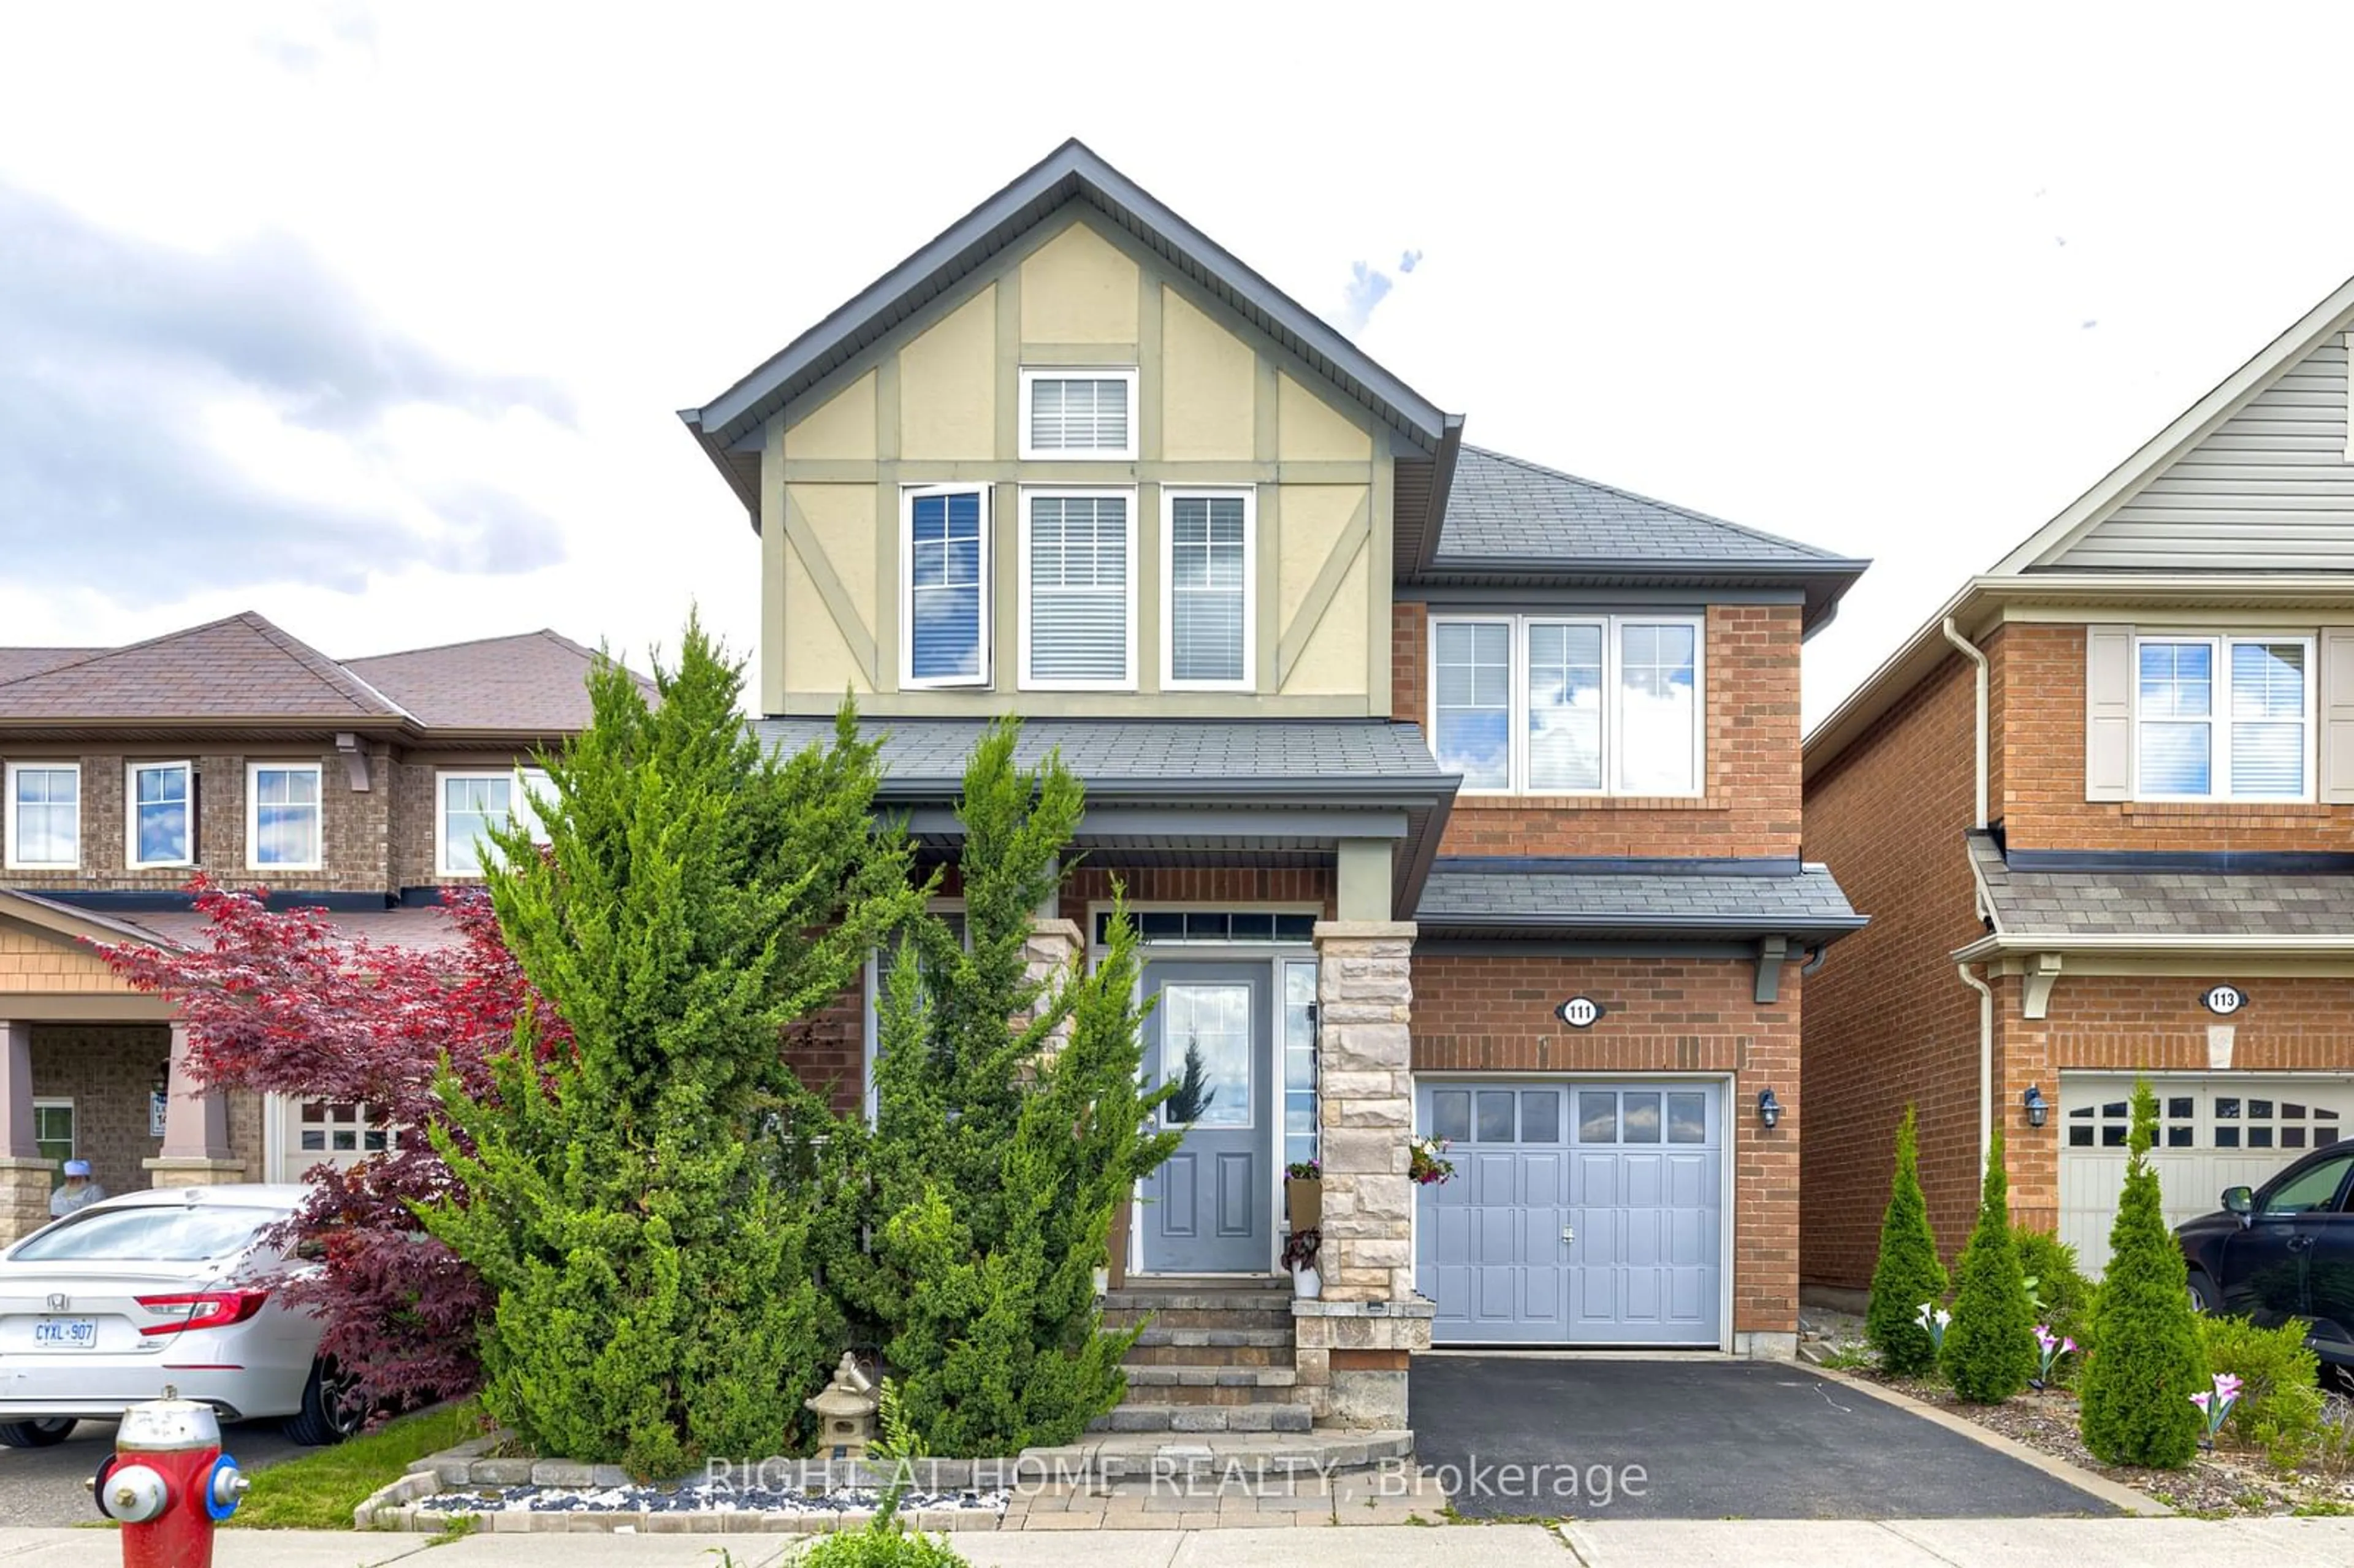 Home with brick exterior material for 111 Commuter Dr, Brampton Ontario L7A 0P7